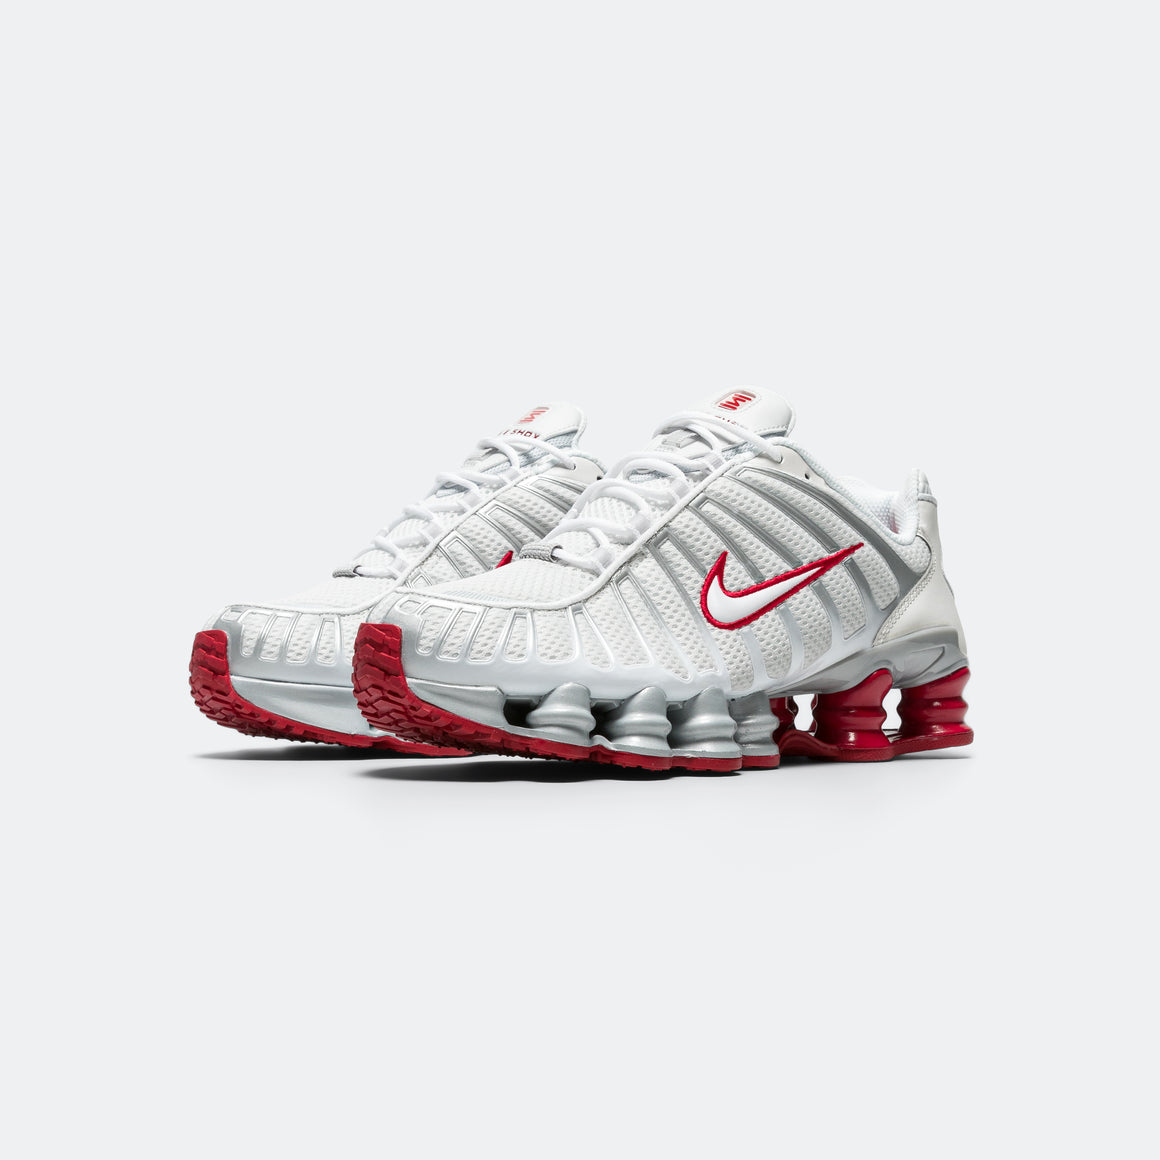 Nike - Womens Shox TL - Platinum Tint/White-Gym Red - UP THERE